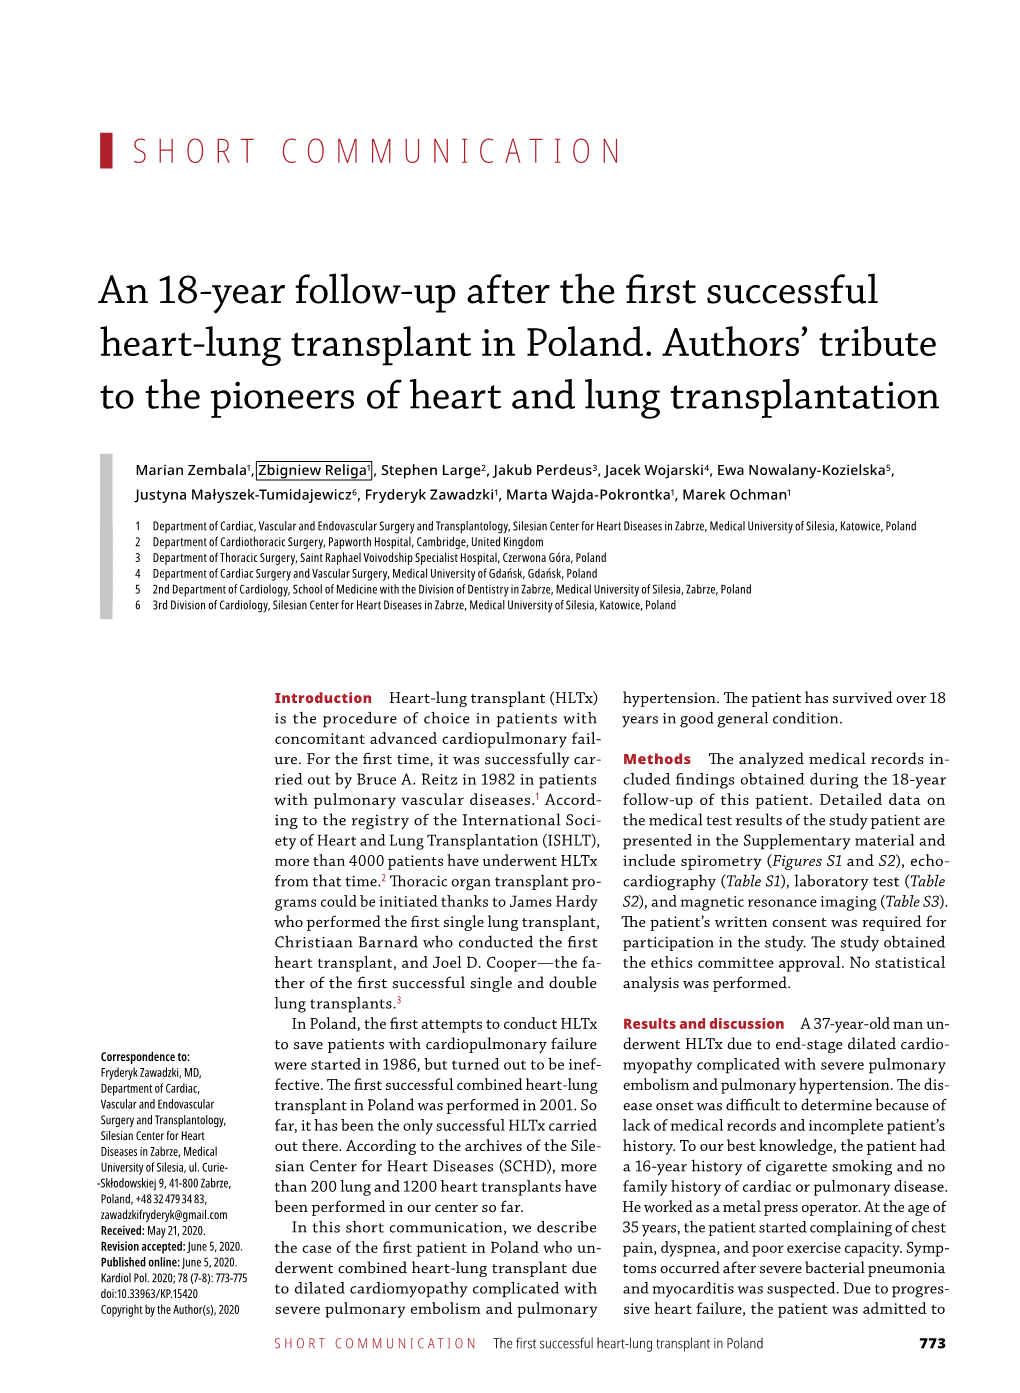 Lung Transplant in Poland. Authors' Tribute to the Pioneers O